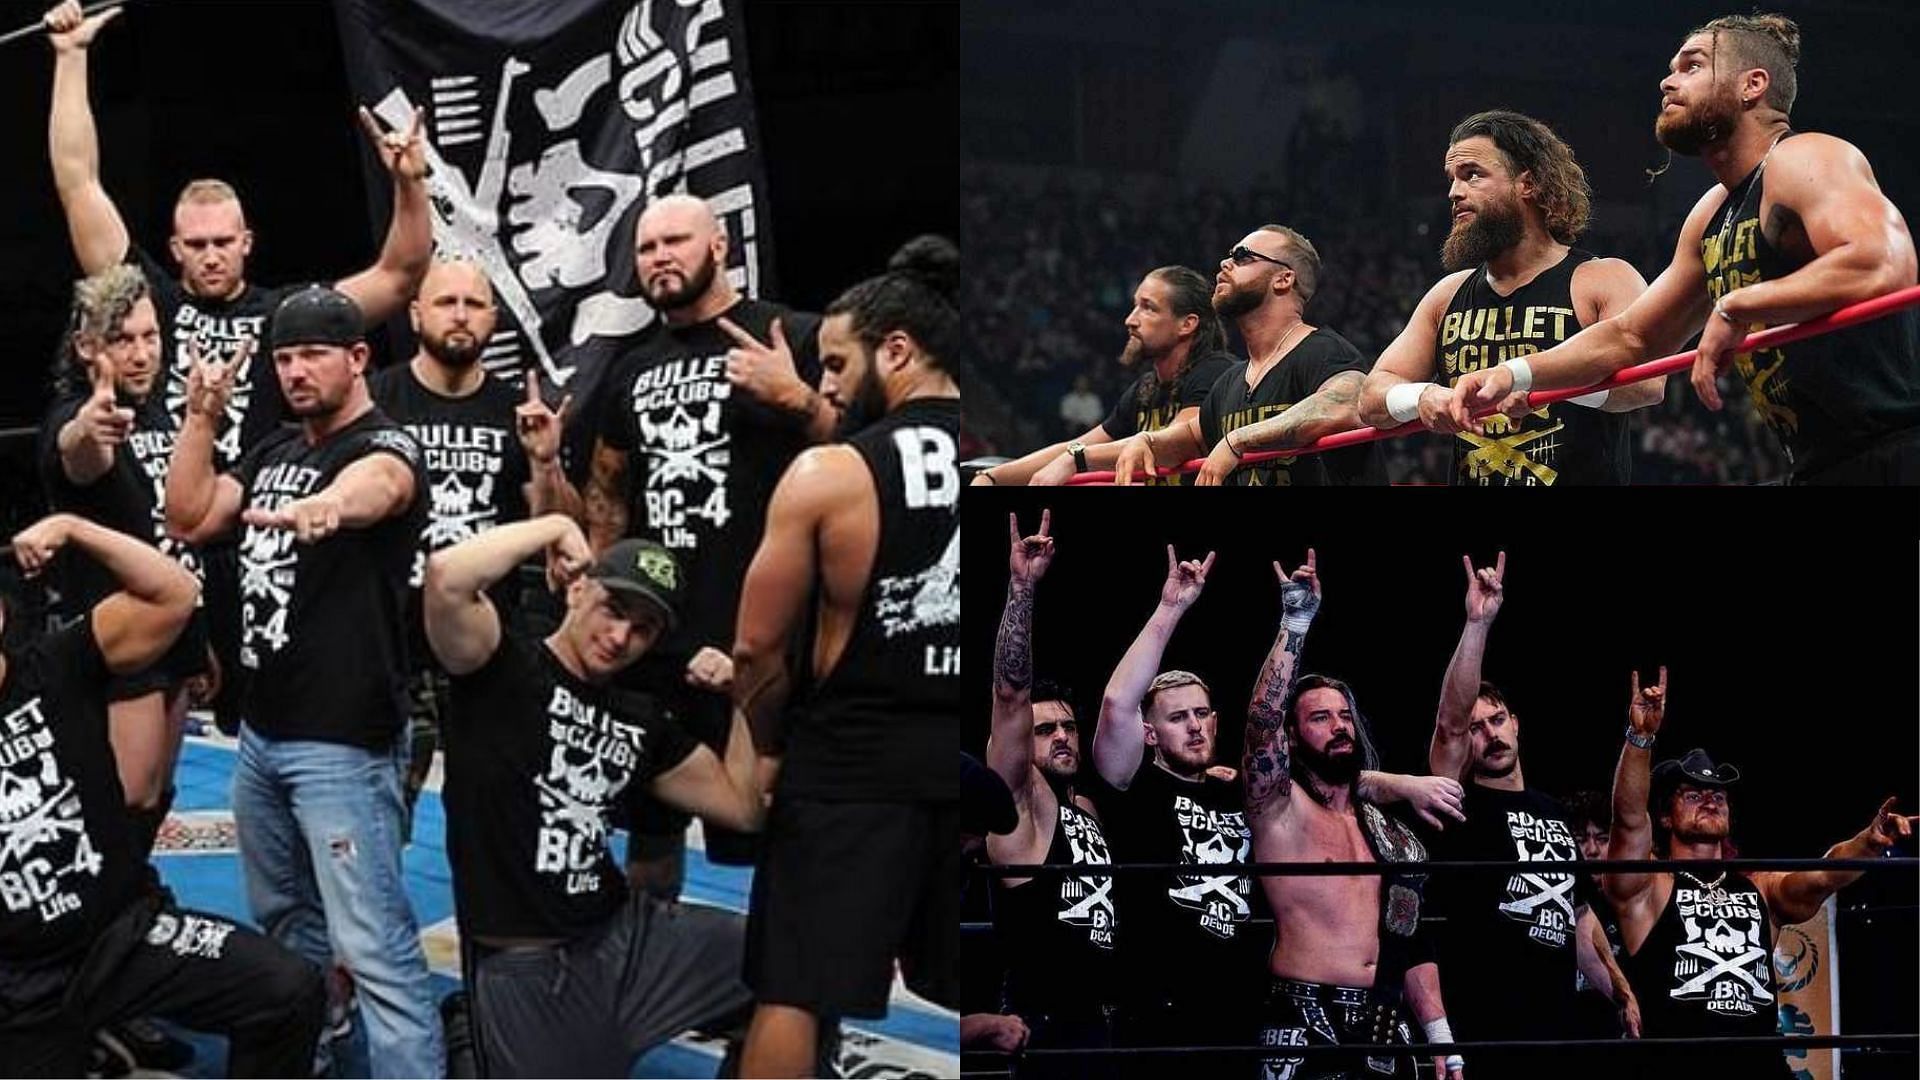 The Bullet Club is one of the greatest factions of all time